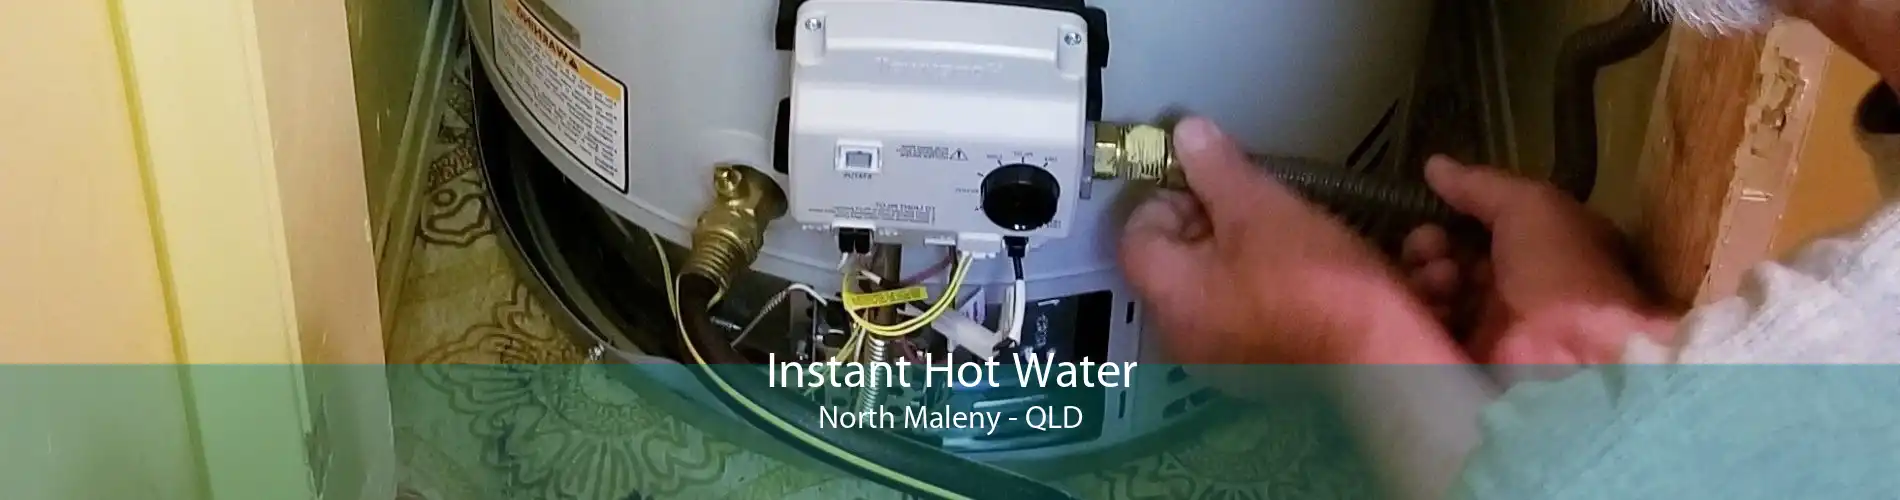 Instant Hot Water North Maleny - QLD